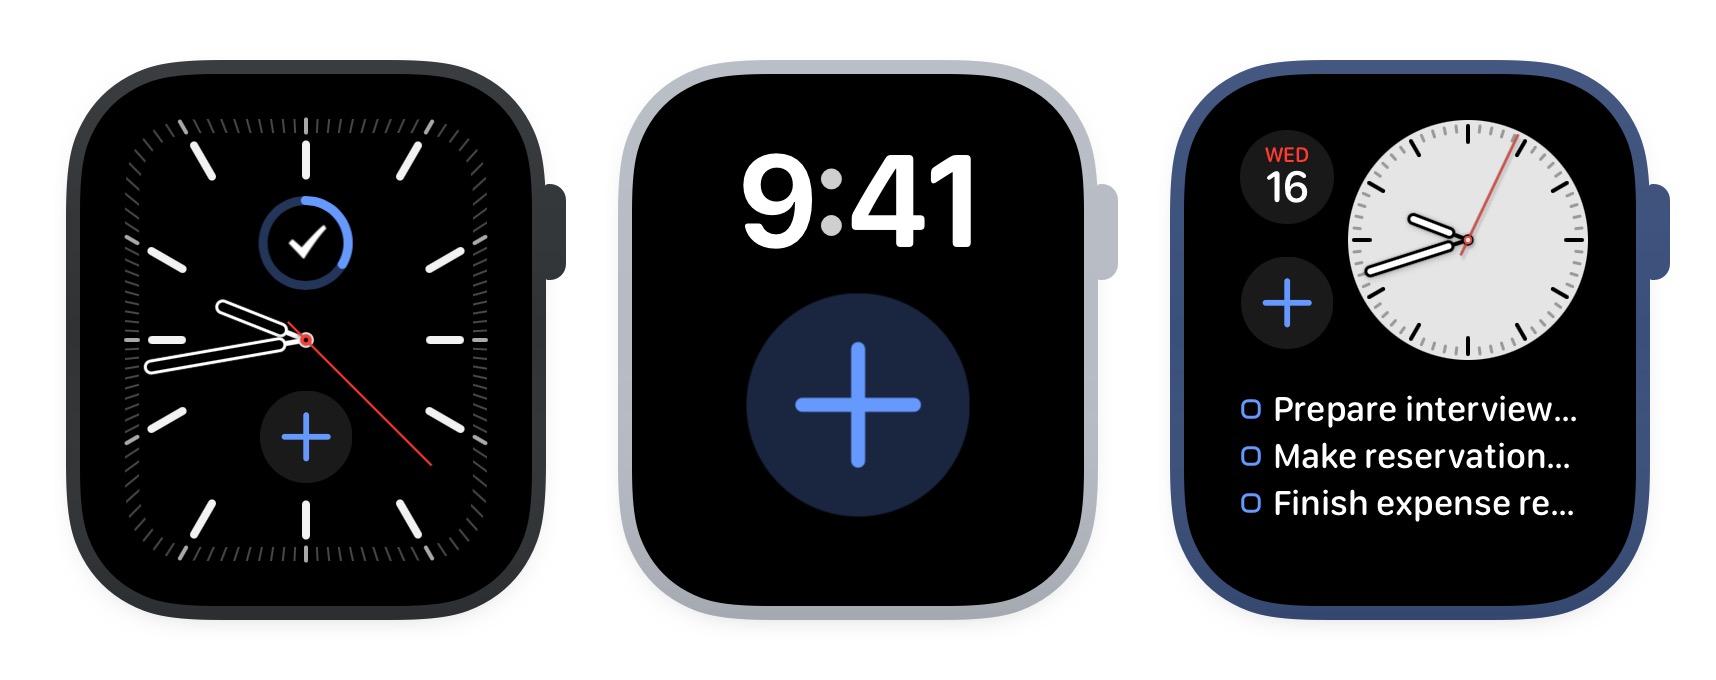 The new + complication on Apple Watch